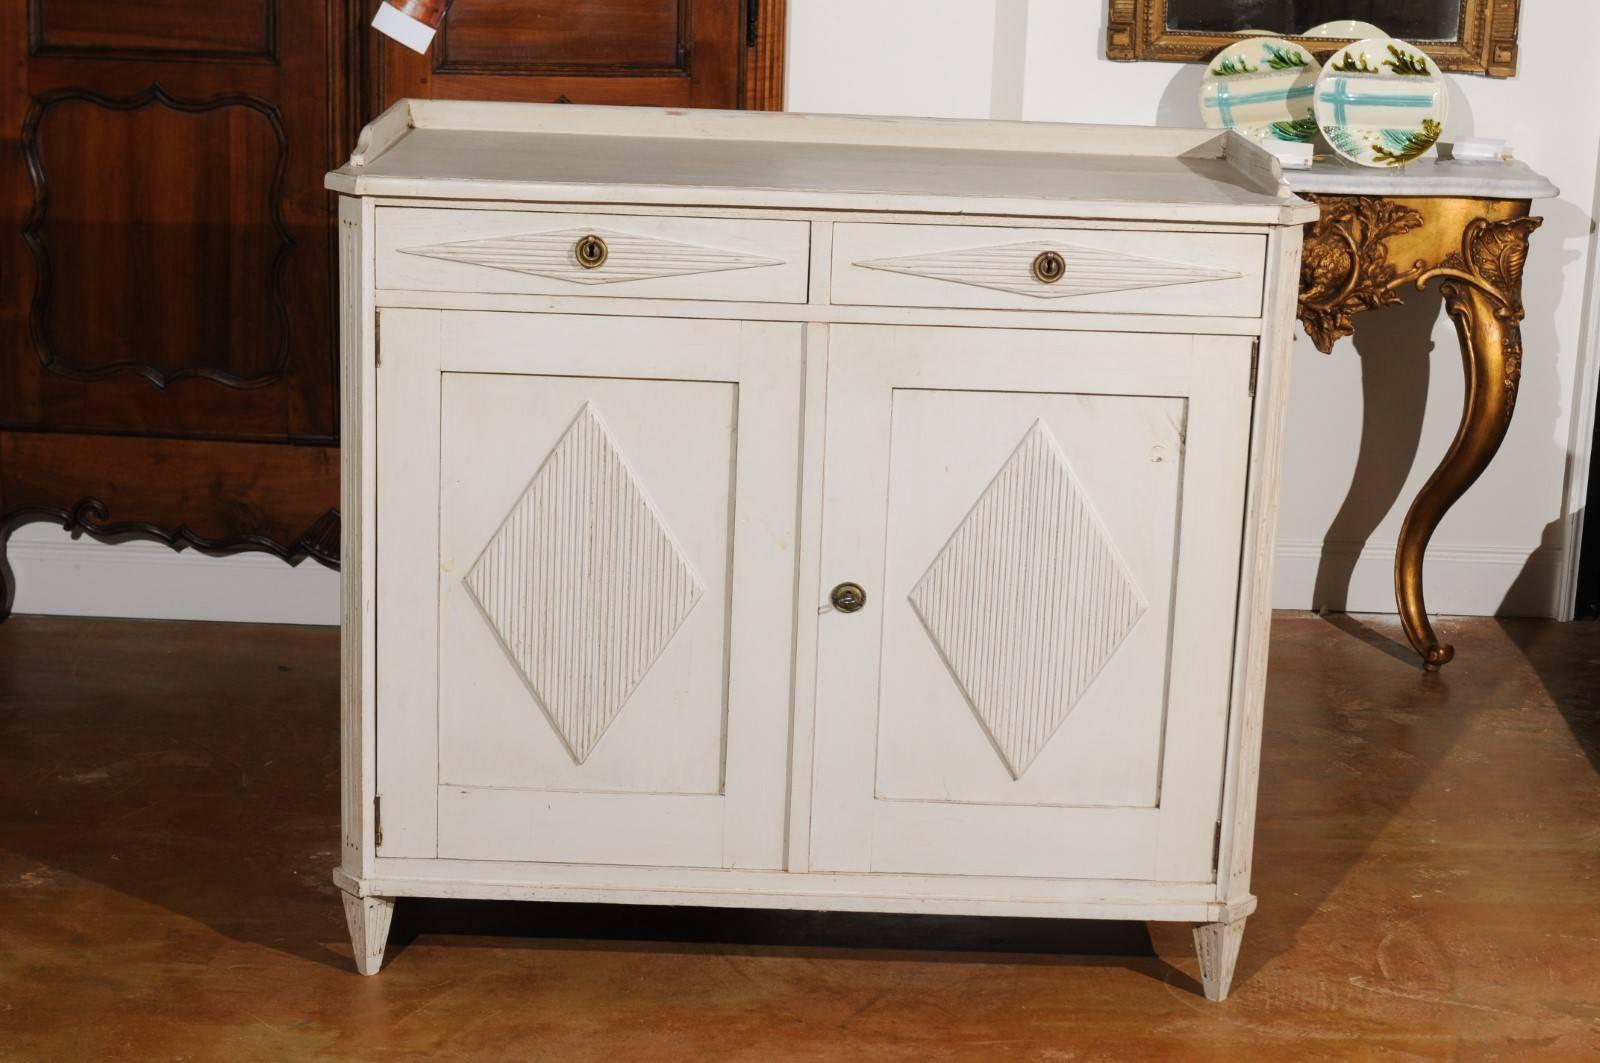 A Swedish Gustavian style painted wood sideboard from the late 19th century, with reeded diamond patterns and two drawers over two doors. This Swedish painted sideboard features a rectangular top with canted corners in the front, surrounded by a